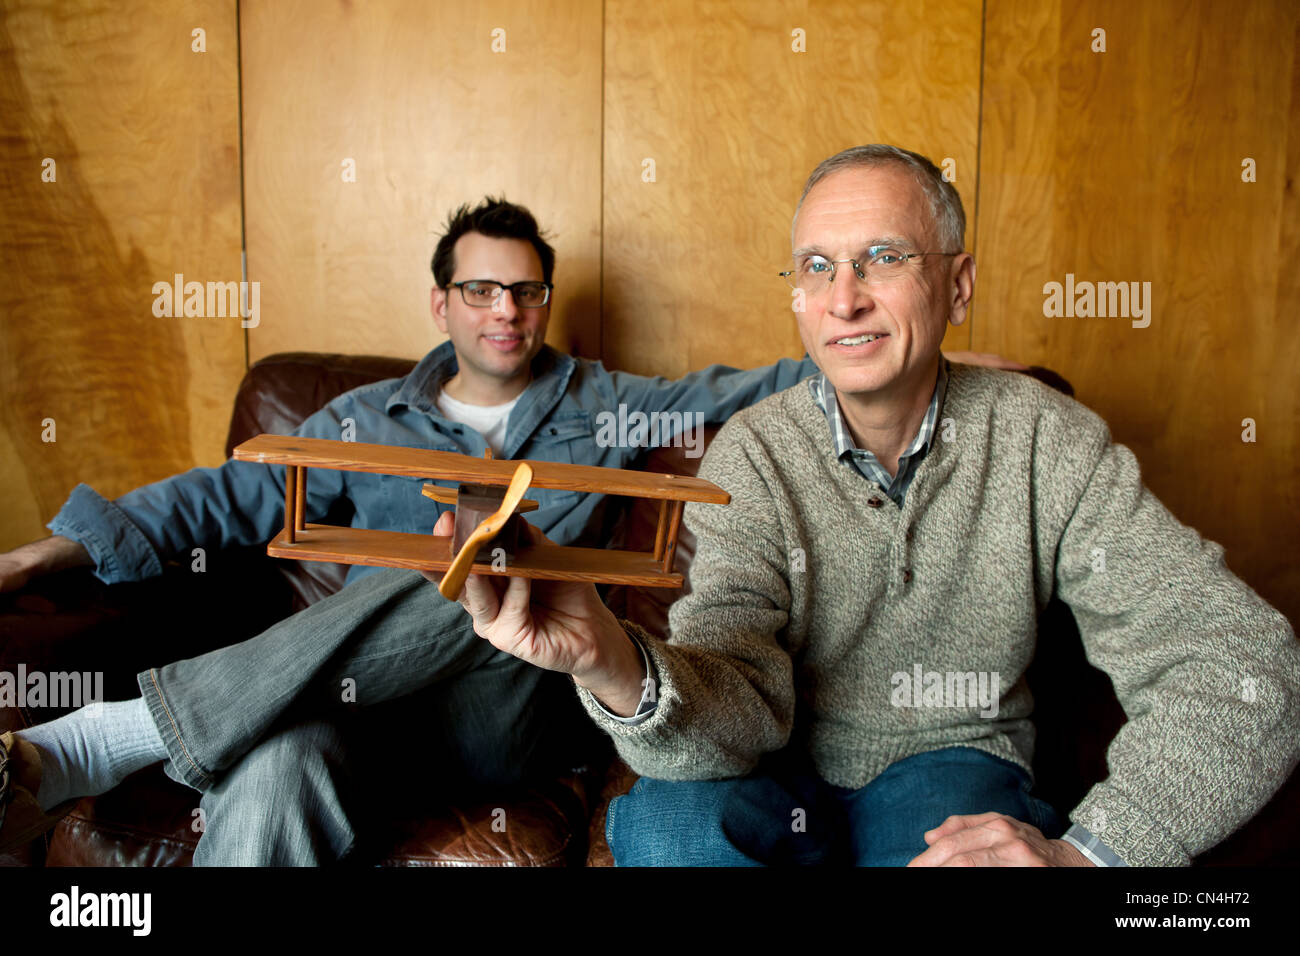 Father holding toy plane with adult son on couch, smiling Stock Photo